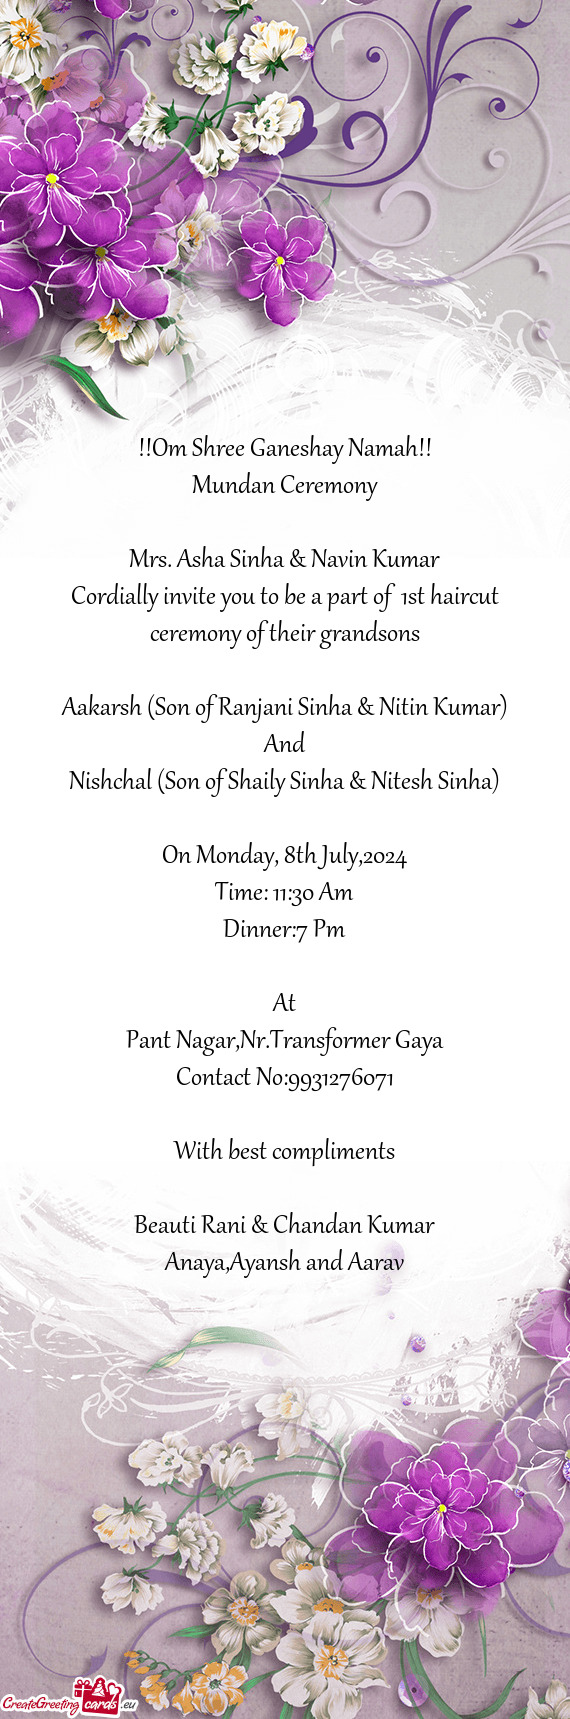 Cordially invite you to be a part of 1st haircut ceremony of their grandsons